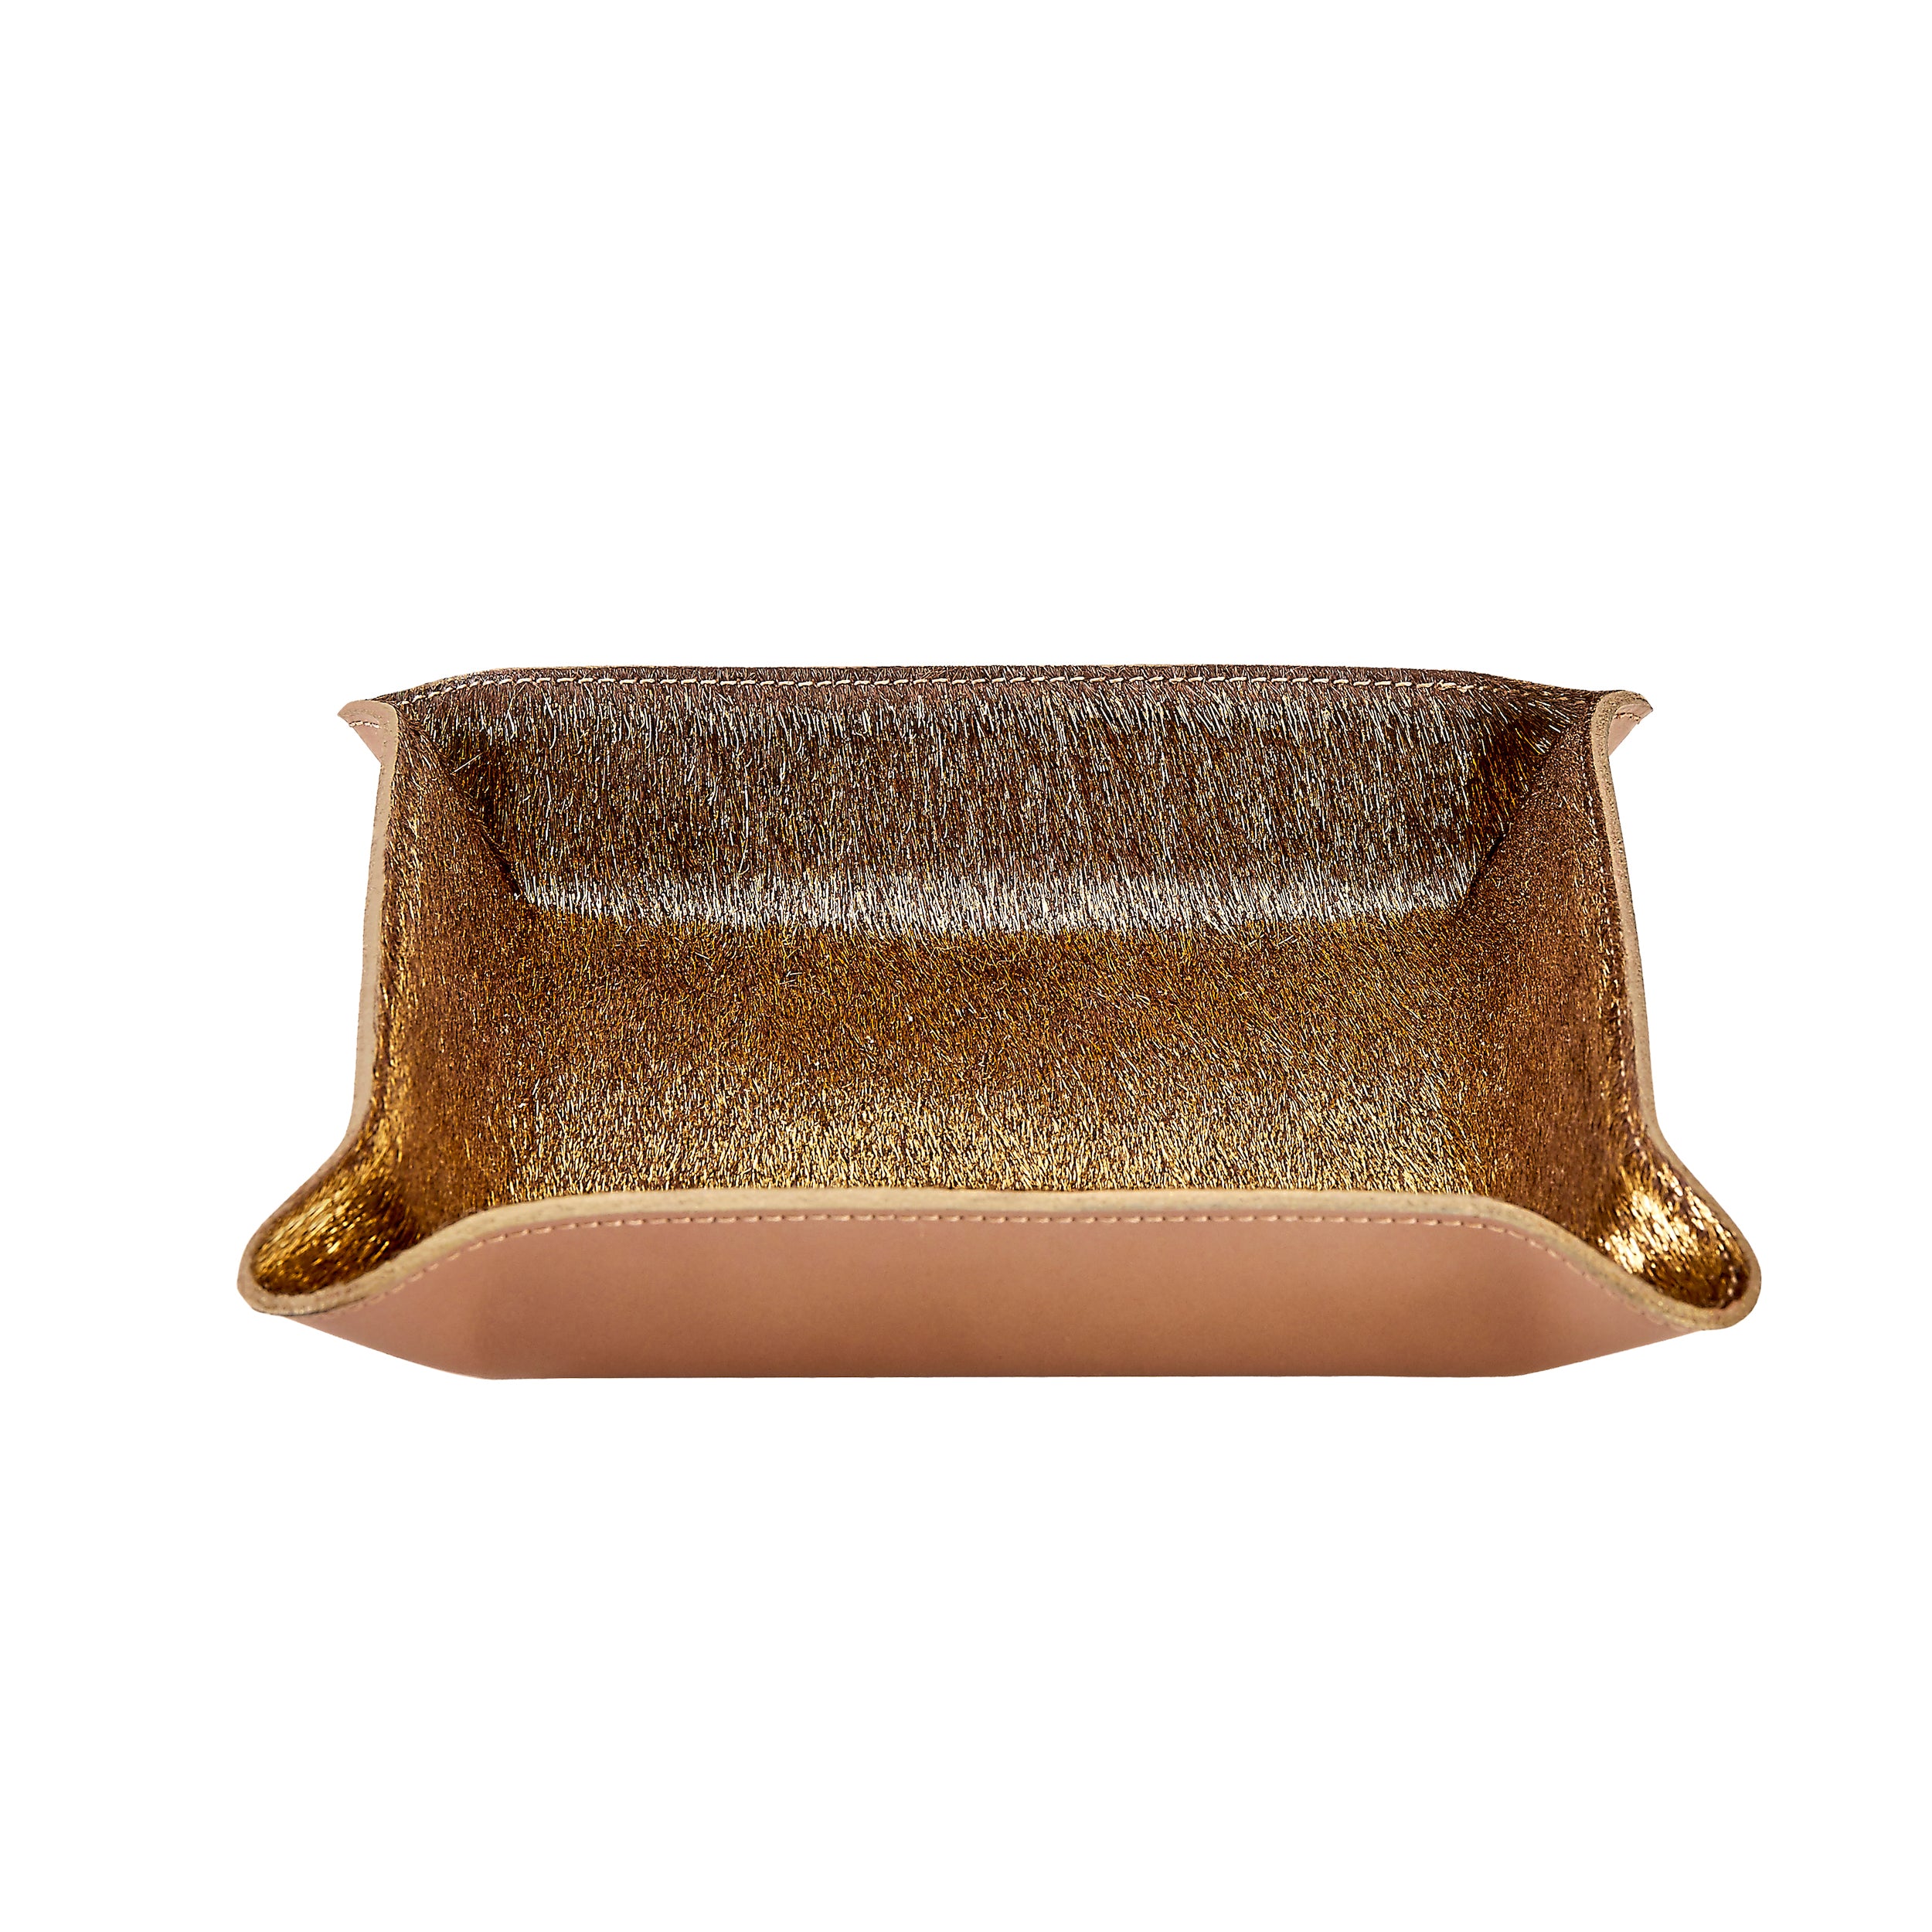 Graphic Image Medium Leather Catchall Tray Gold Washed Haircalf